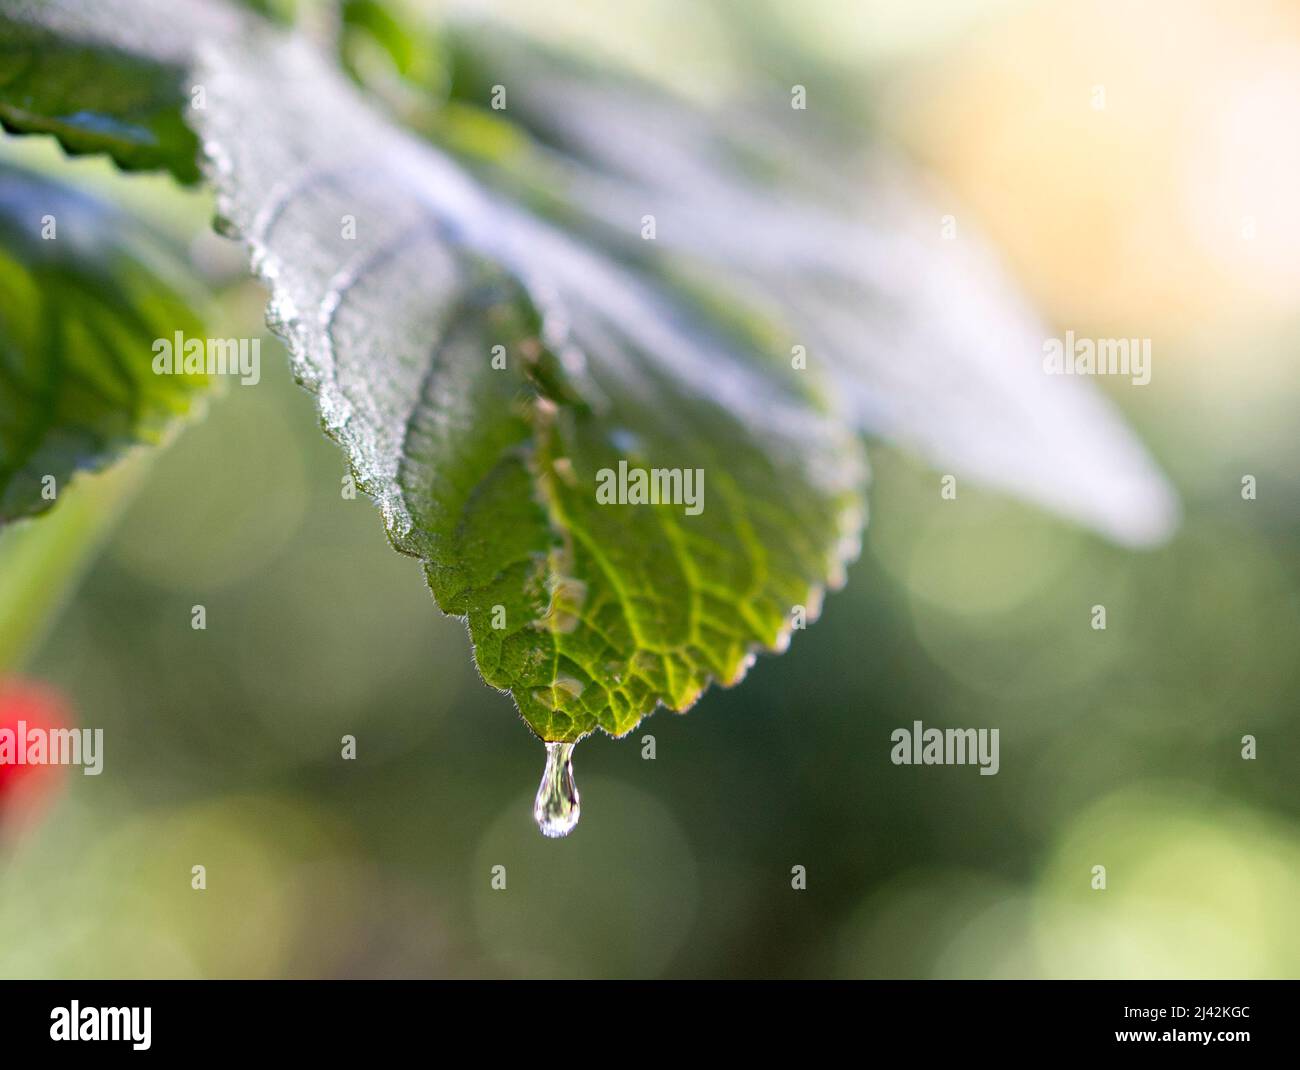 Green leaf with raindrops in bright sunlight Stock Photo